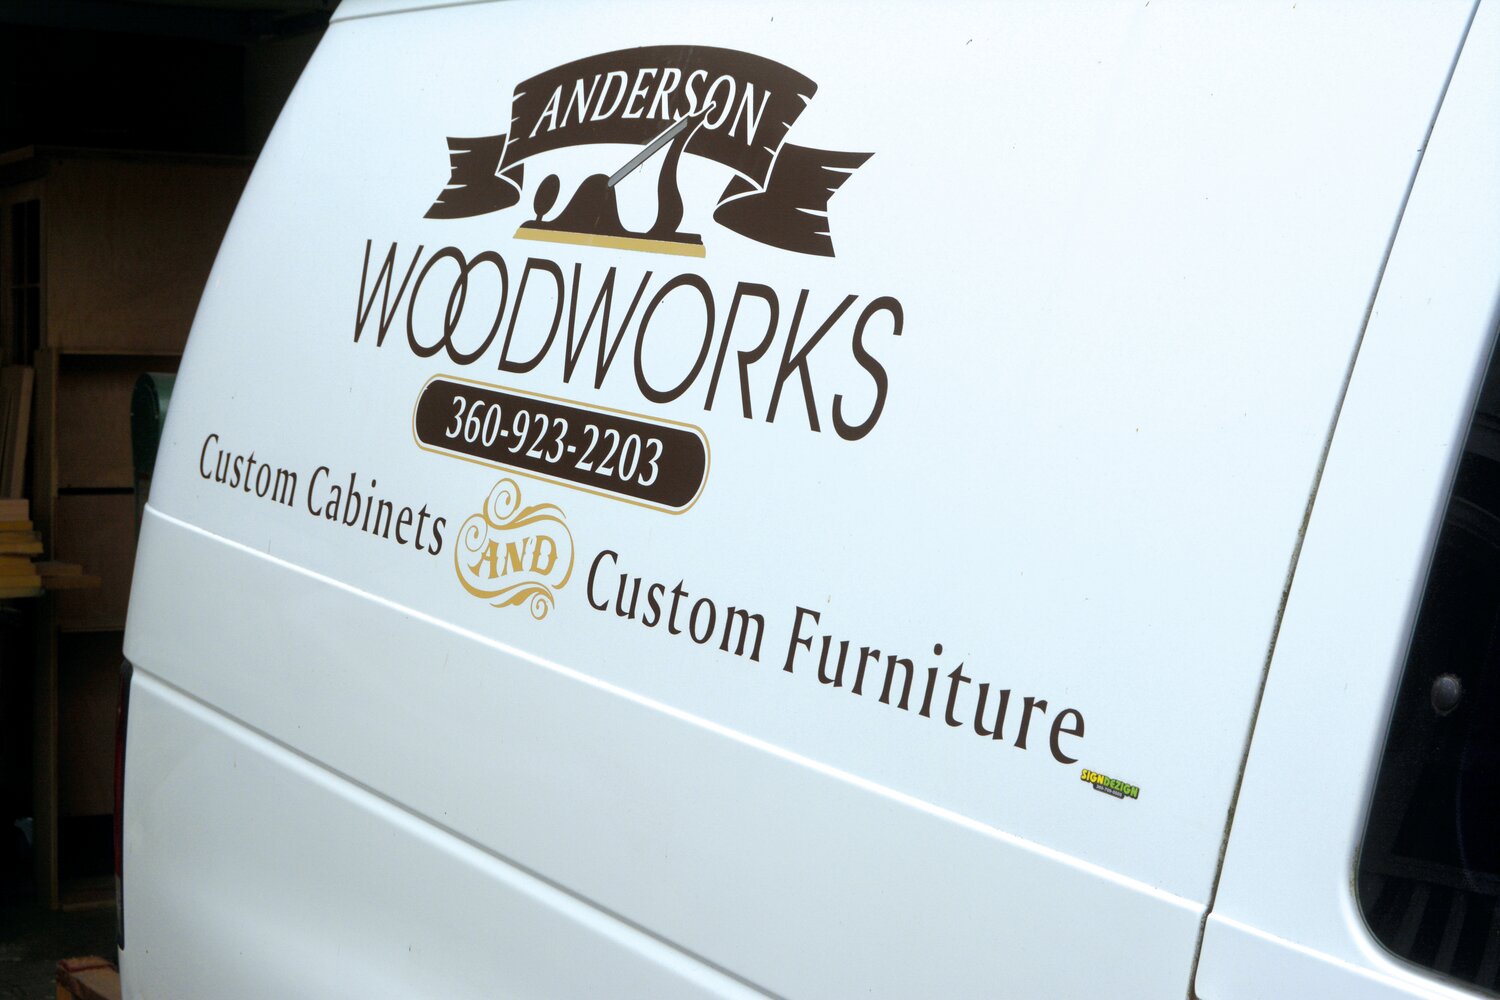 Brian Anderson's logo for Anderson Woodworks on his van in his driveway on Oct. 20.